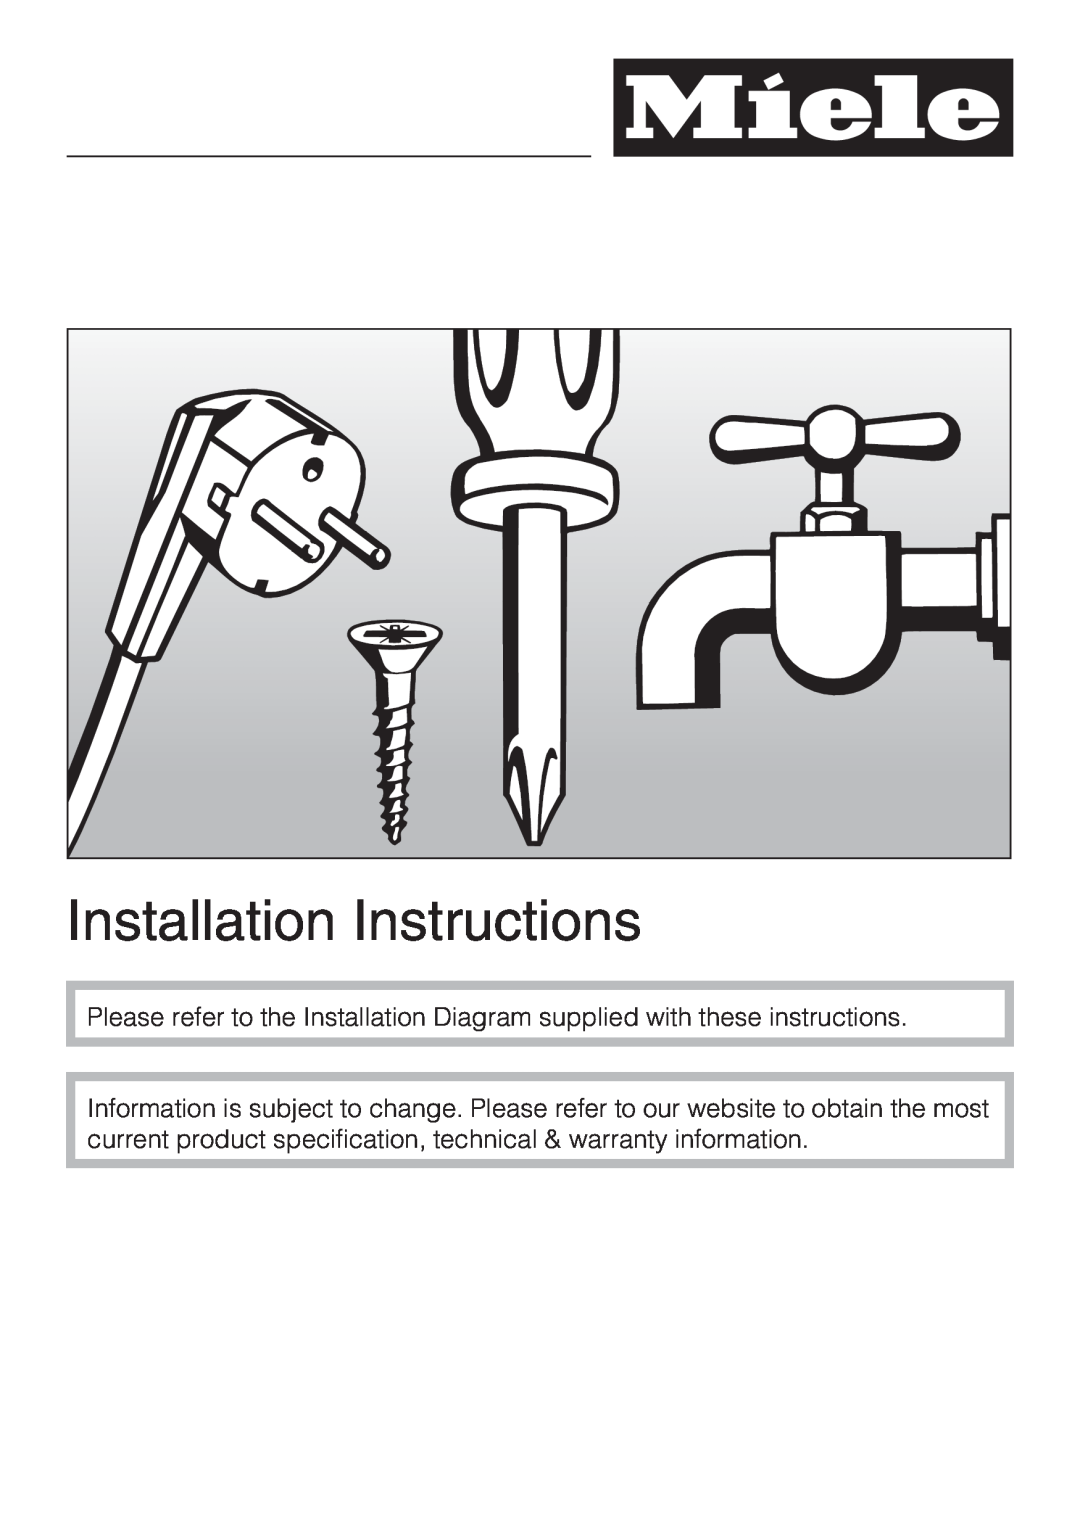 Miele G5600, G5605 manual Installation Instructions 